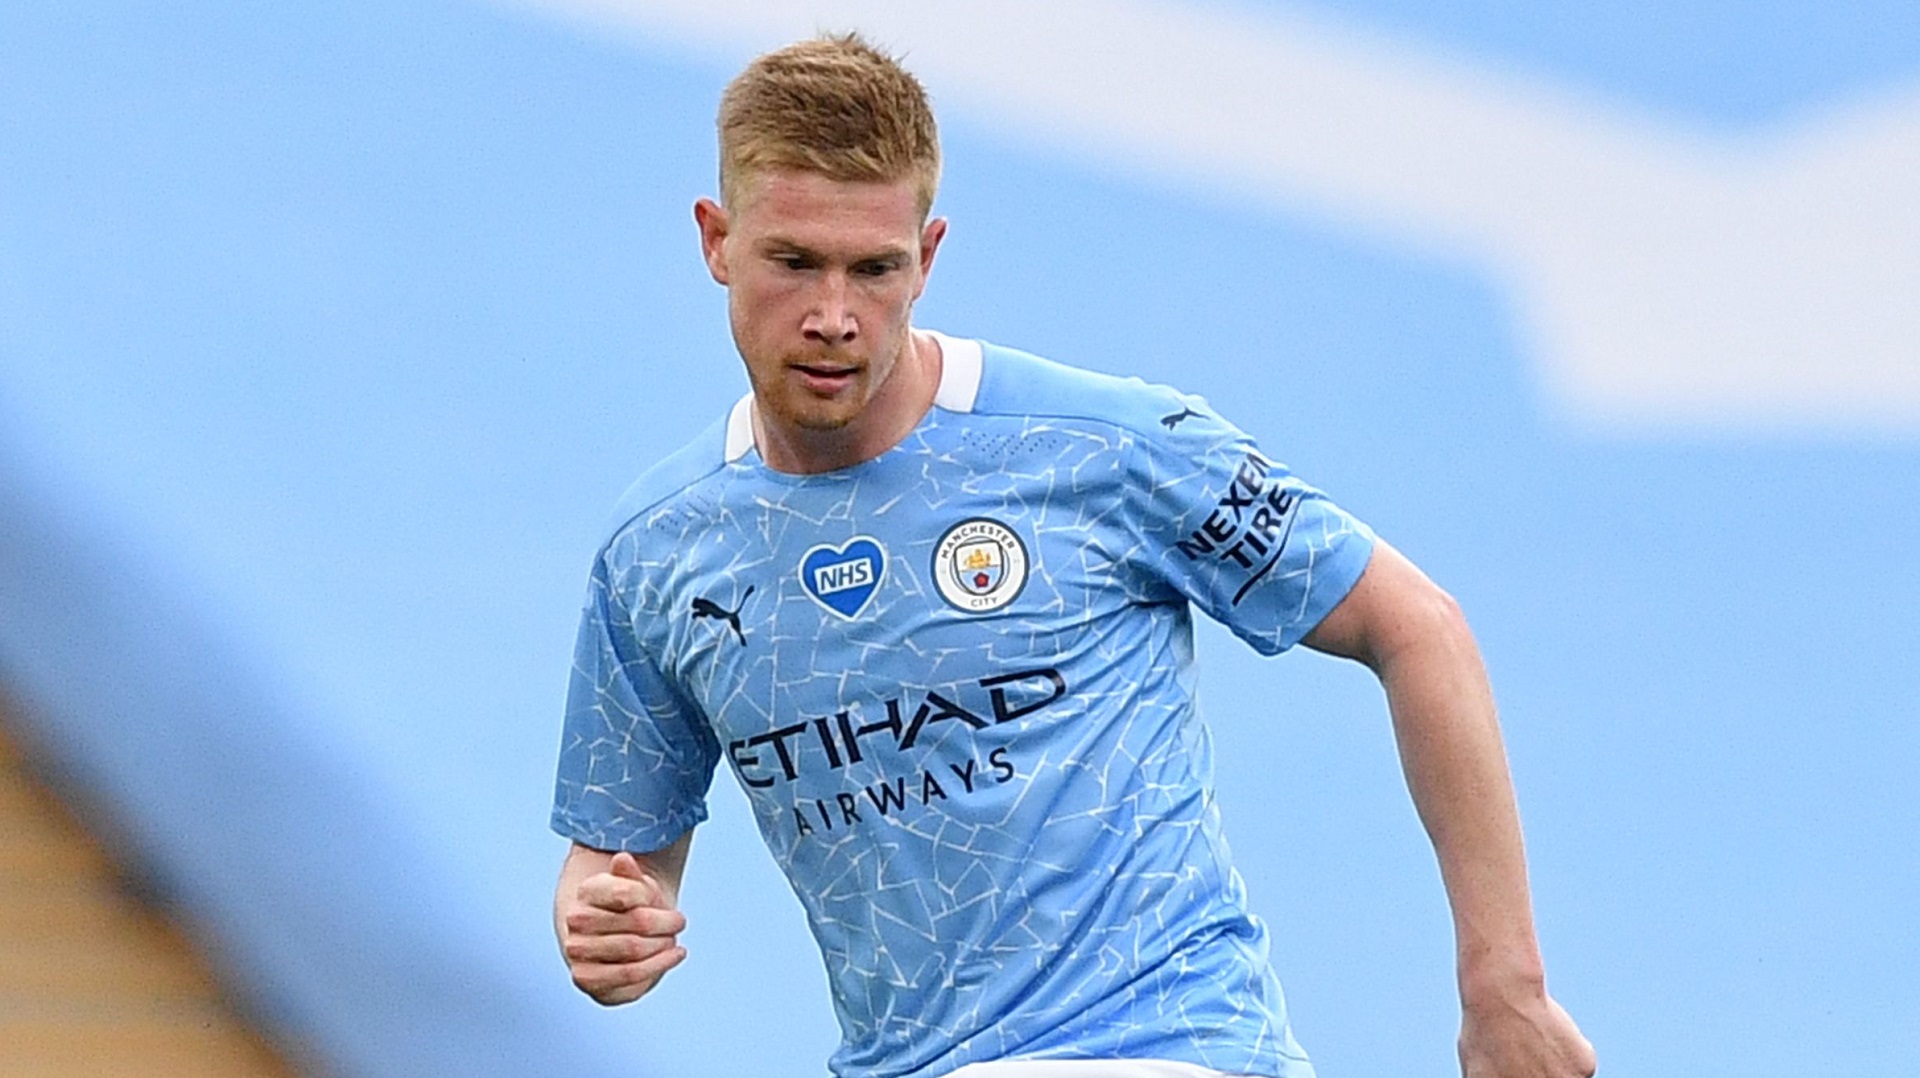 'De Bruyne should have had 30 assists!' - Jesus claims Man City let Belgian star down this season